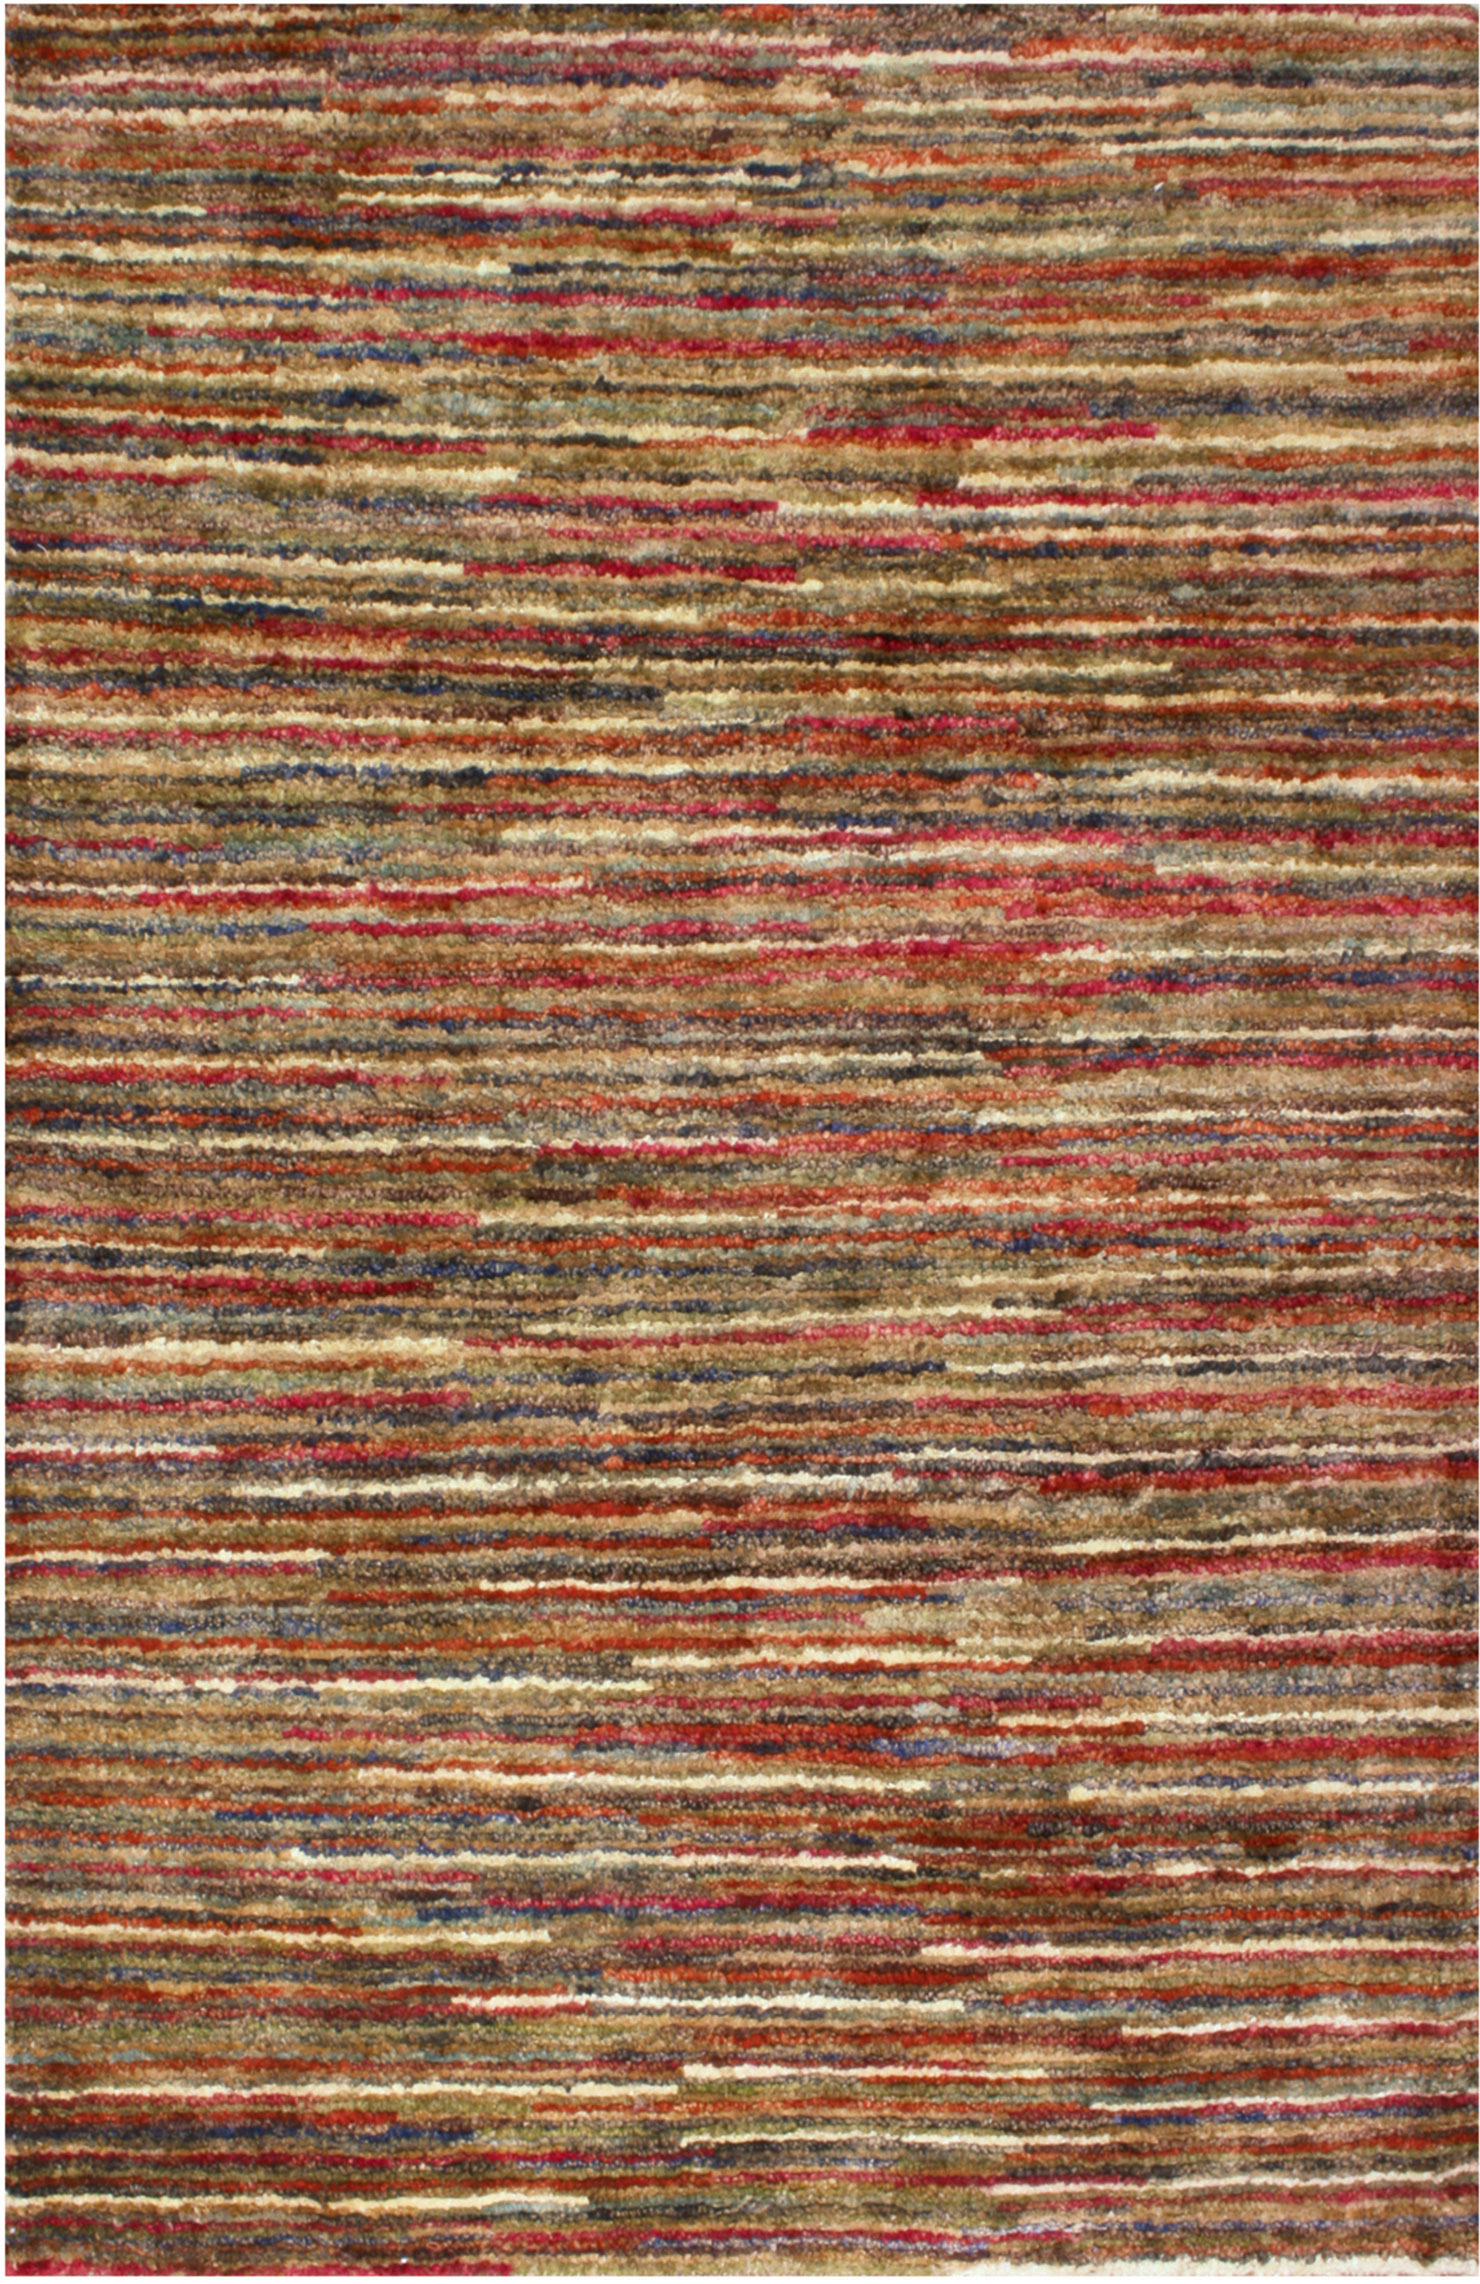 Transitional & Casual Rugs Natur NA-390 Multi Red - Burgundy & Multi Hand Woven Rug